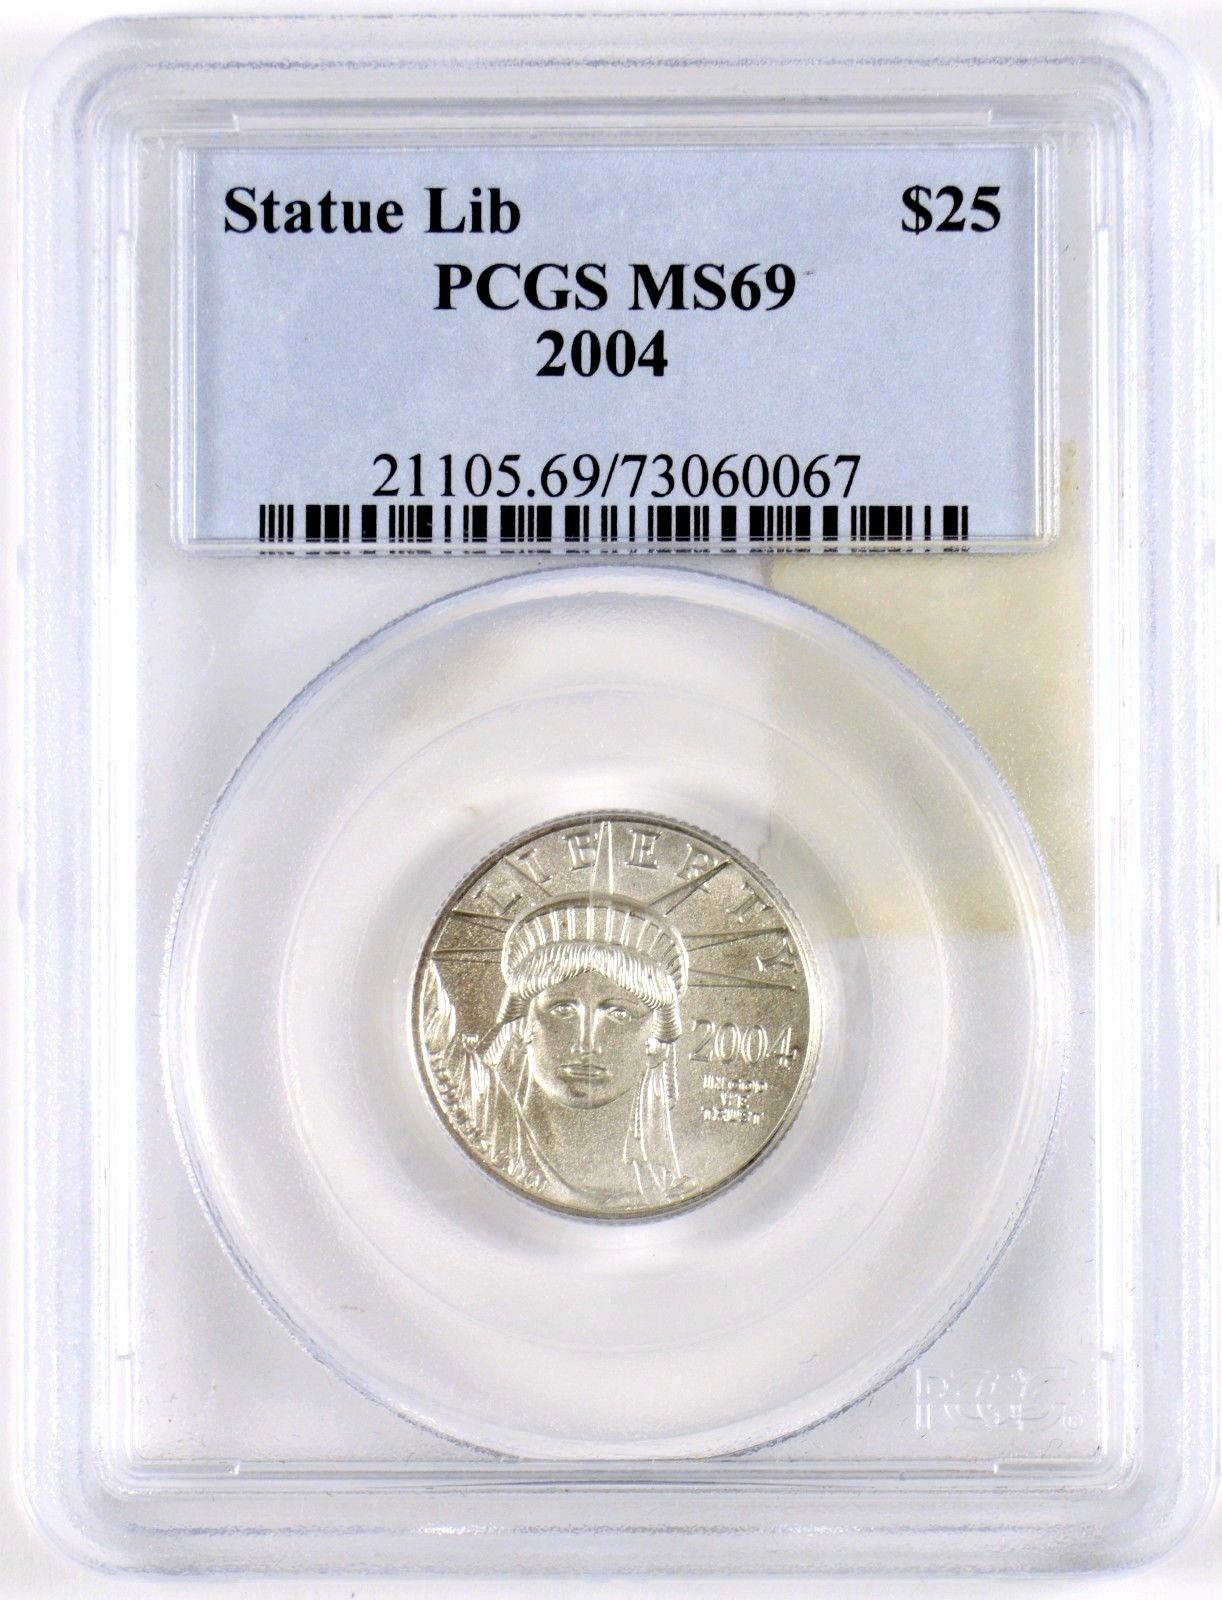 2004 $25 American Eagle Statue of Liberty 1/4 oz Platinum Coin PCGS Graded MS69